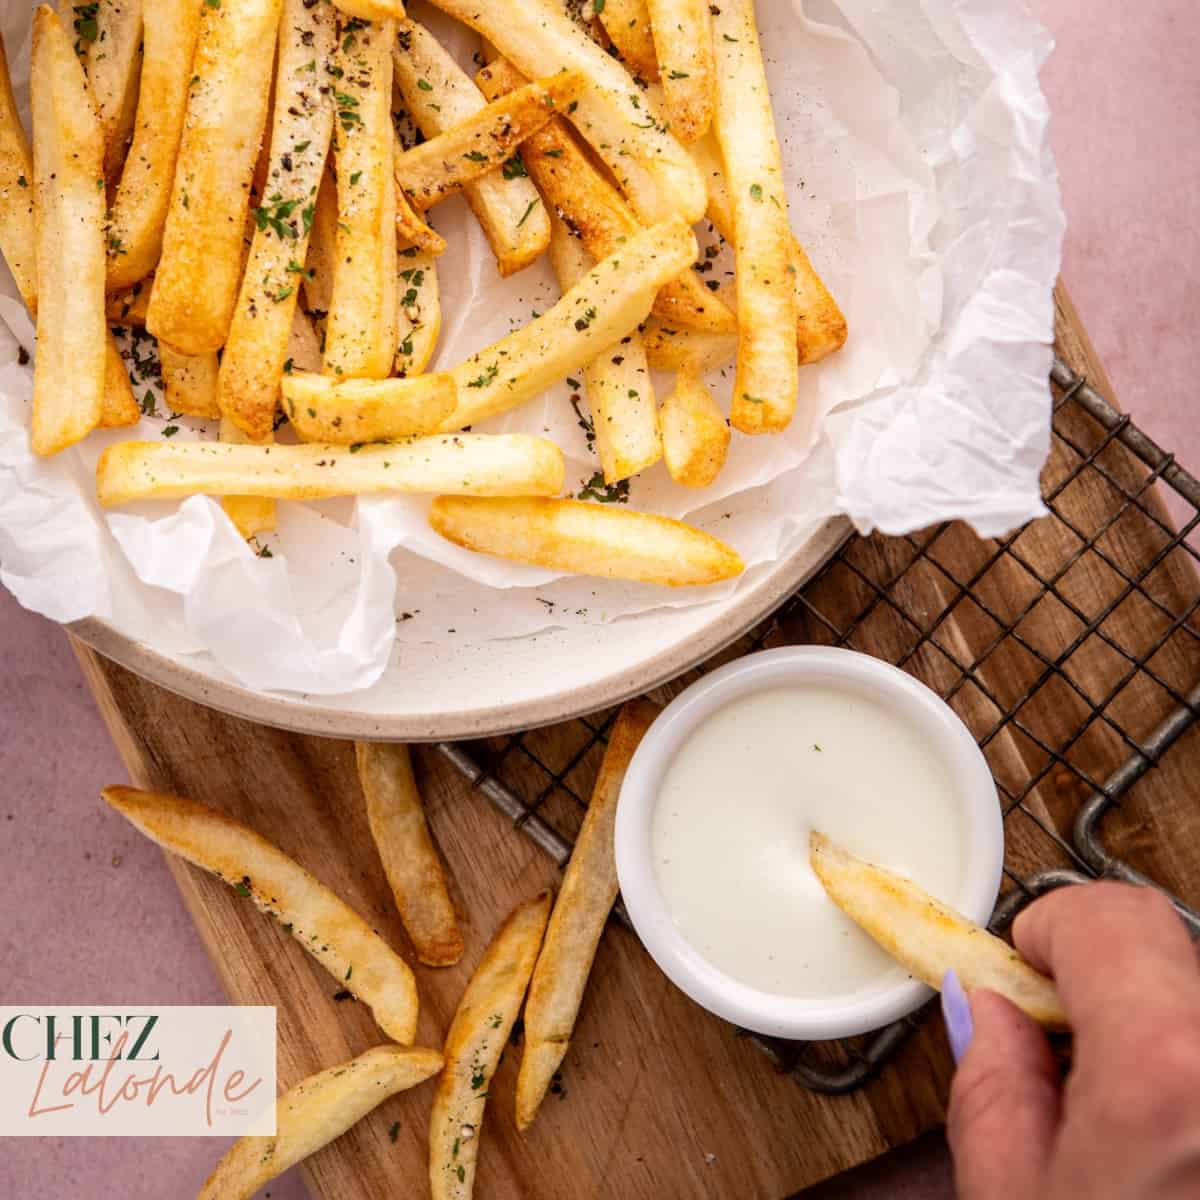 Dipping air fryer French fries into this traditional Lebanese Garlic sauce called Toum.